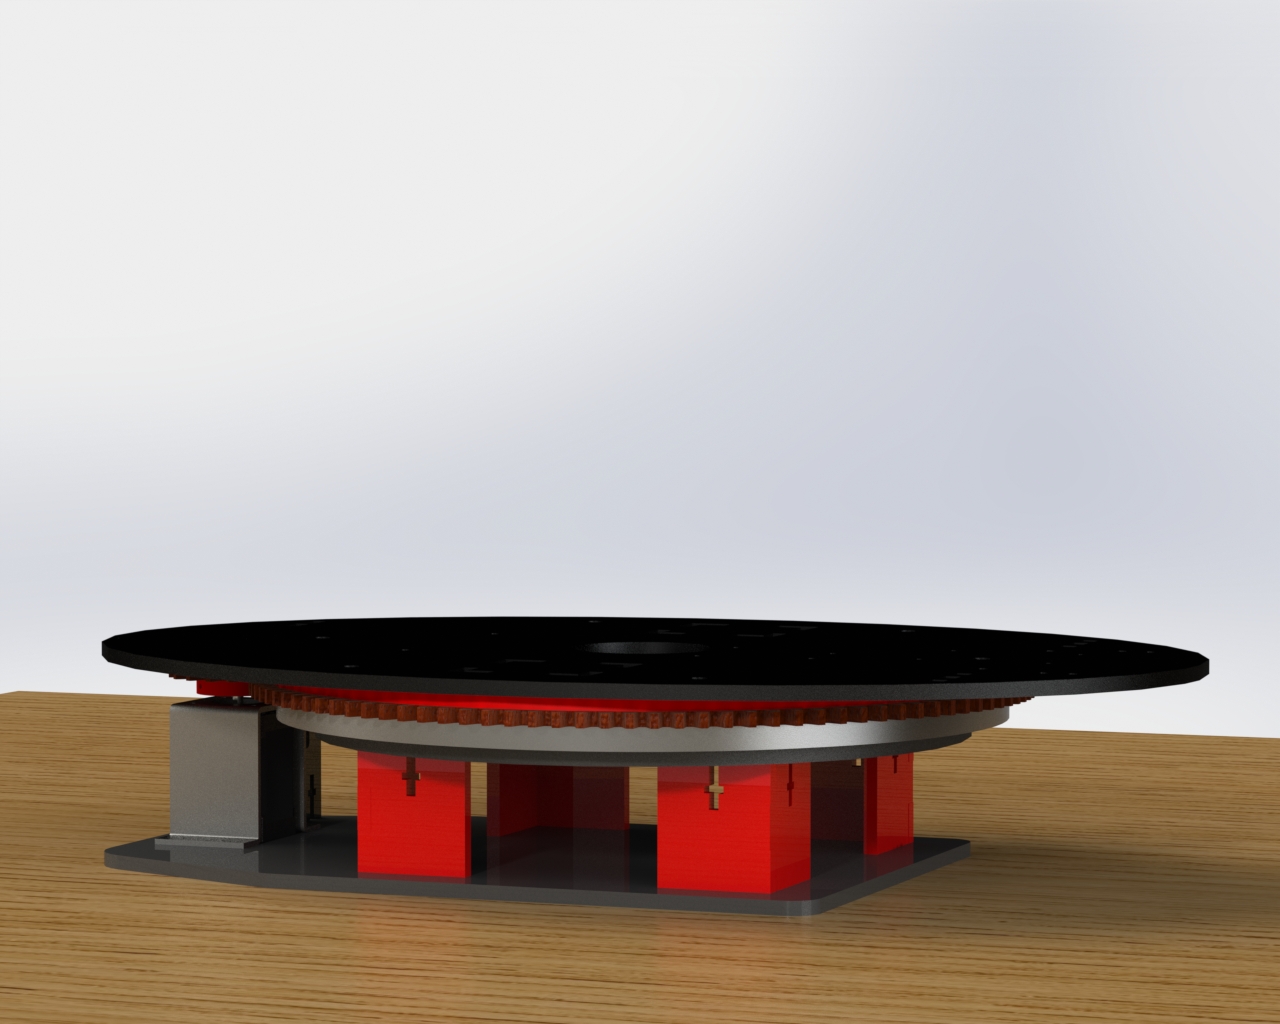 assemblied turntable